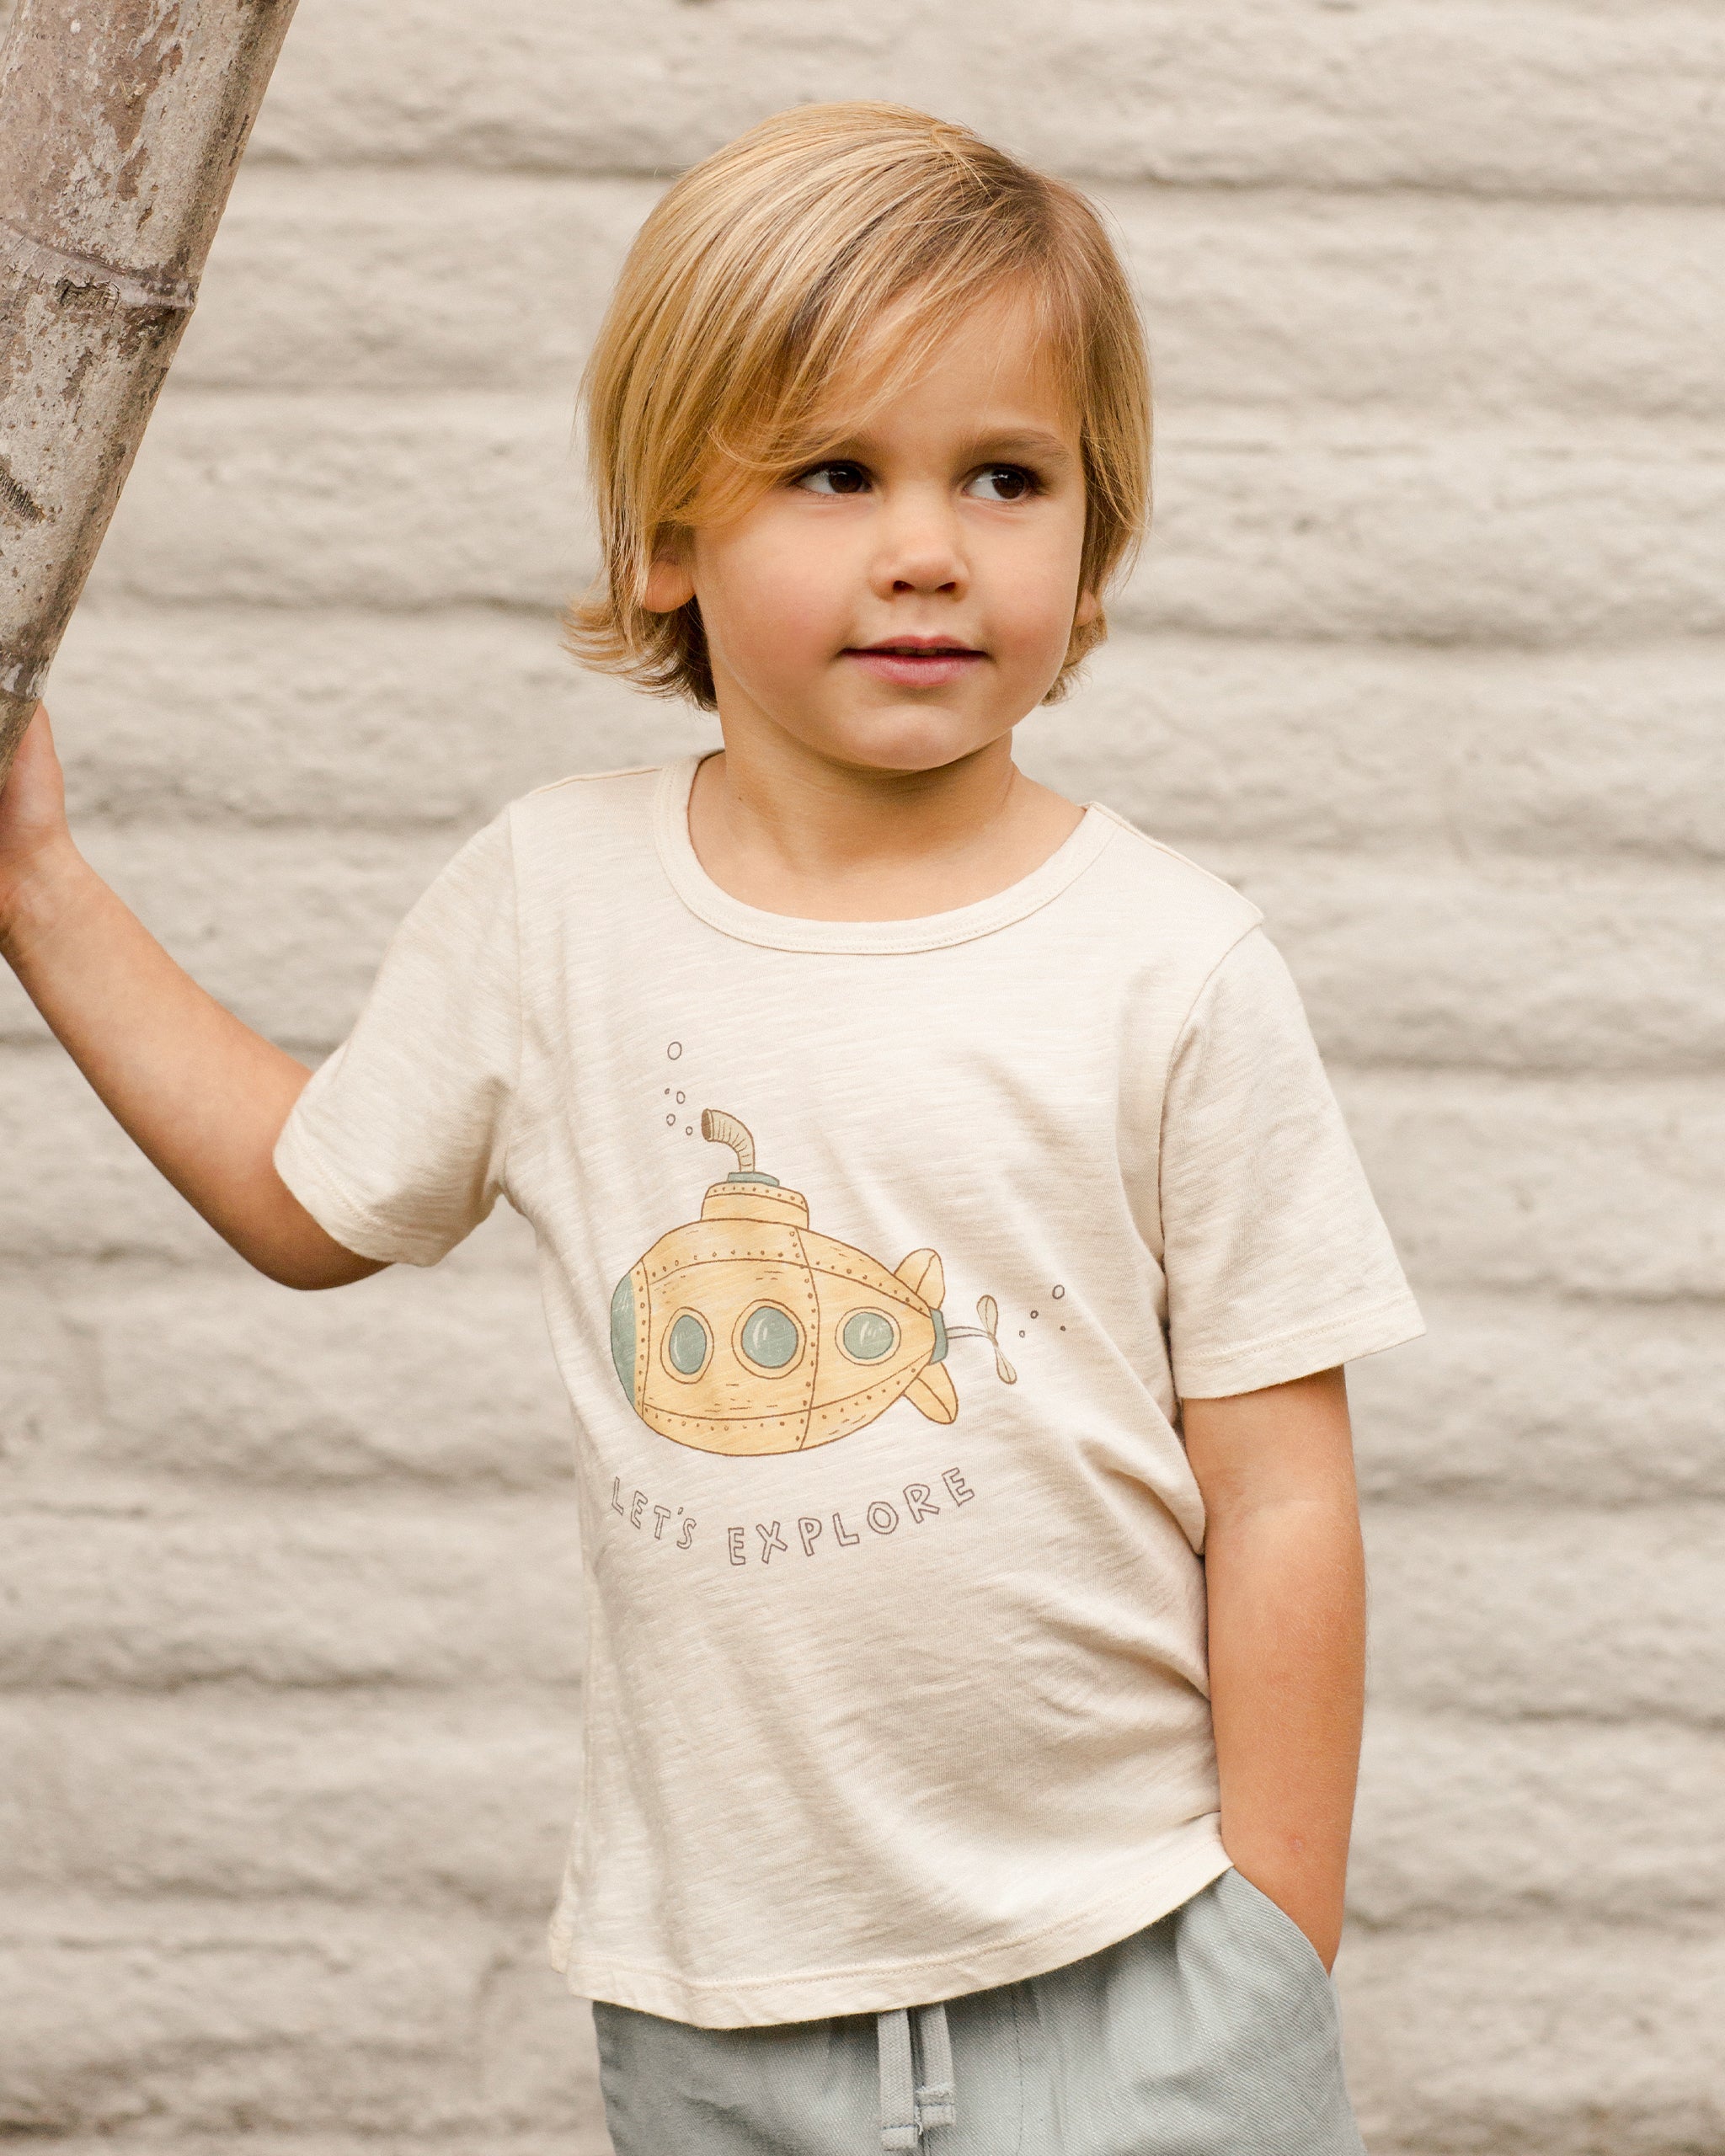 Basic Tee || Submarine - Rylee + Cru | Kids Clothes | Trendy Baby Clothes | Modern Infant Outfits |